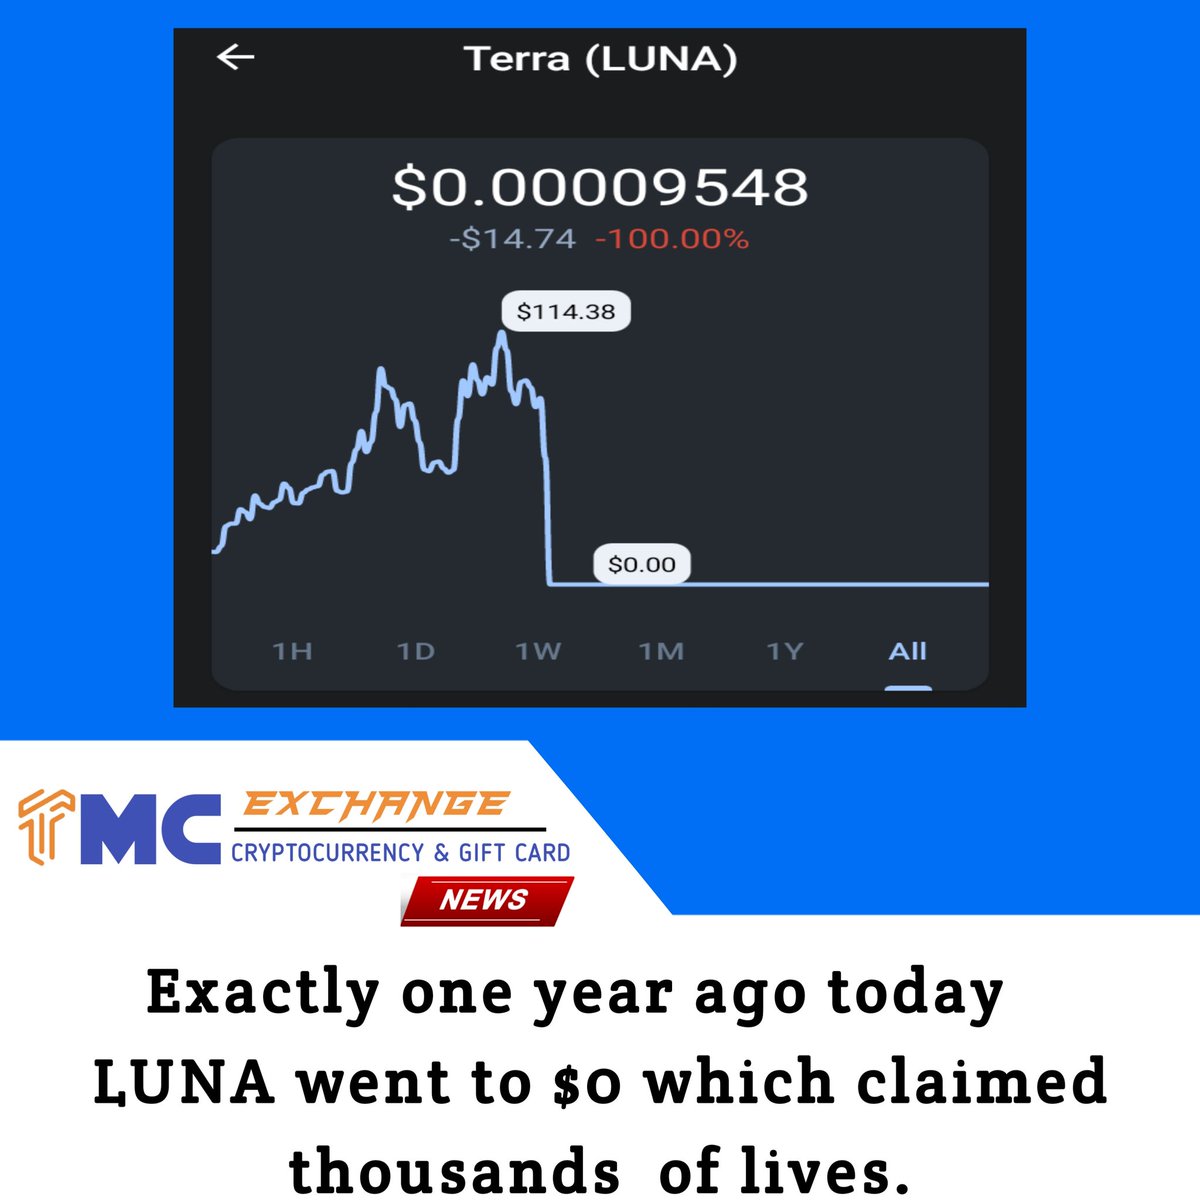 We all could recall how #Luna collapse, which destroyed many lives physically and financially

#tmcnews #tmcex #CryptoNews  #tmcexchange #lunaterra